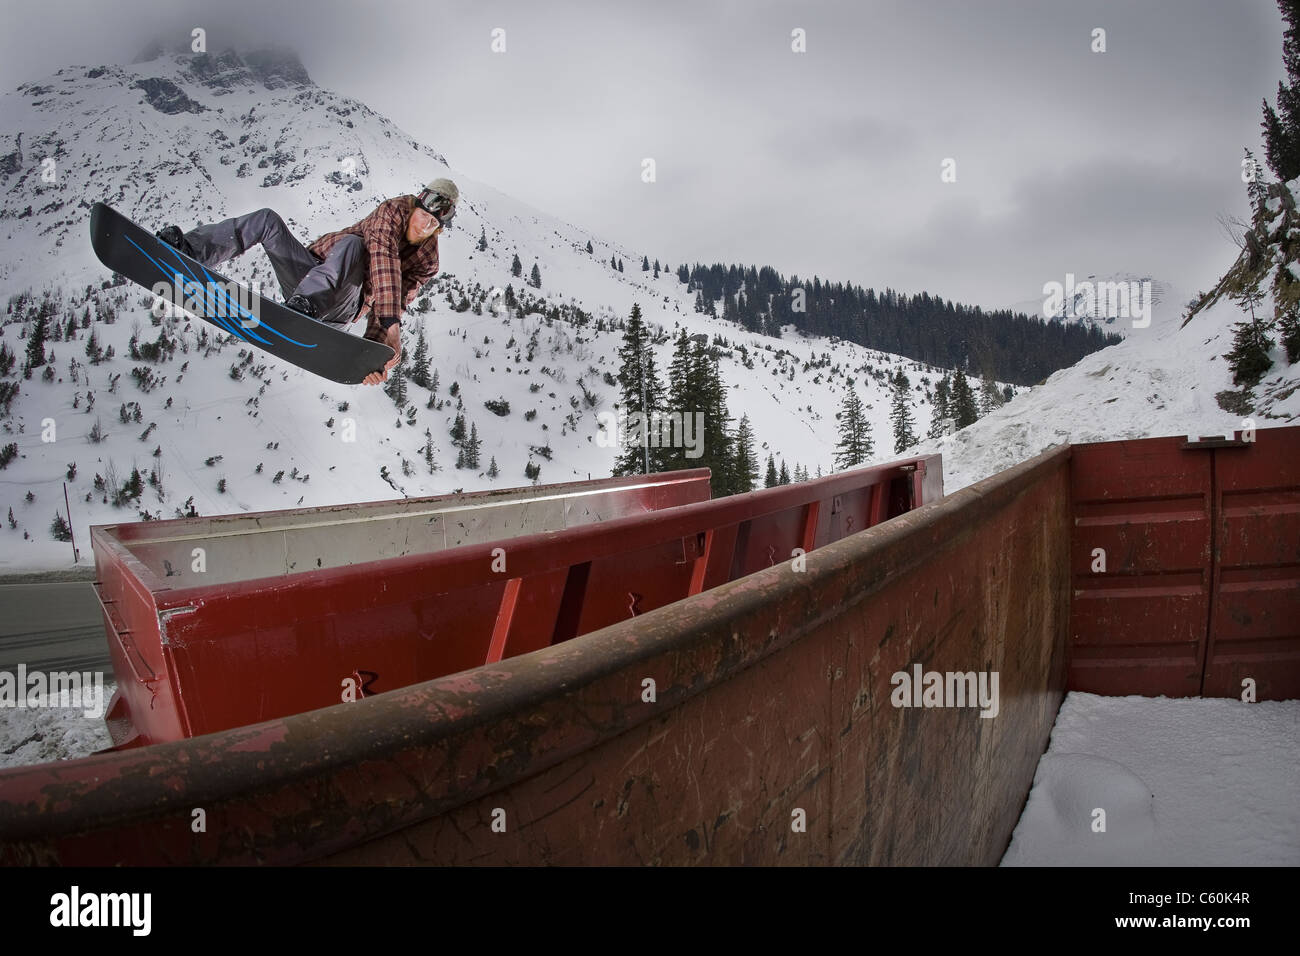 Snowboarder jumping over train cars Stock Photo